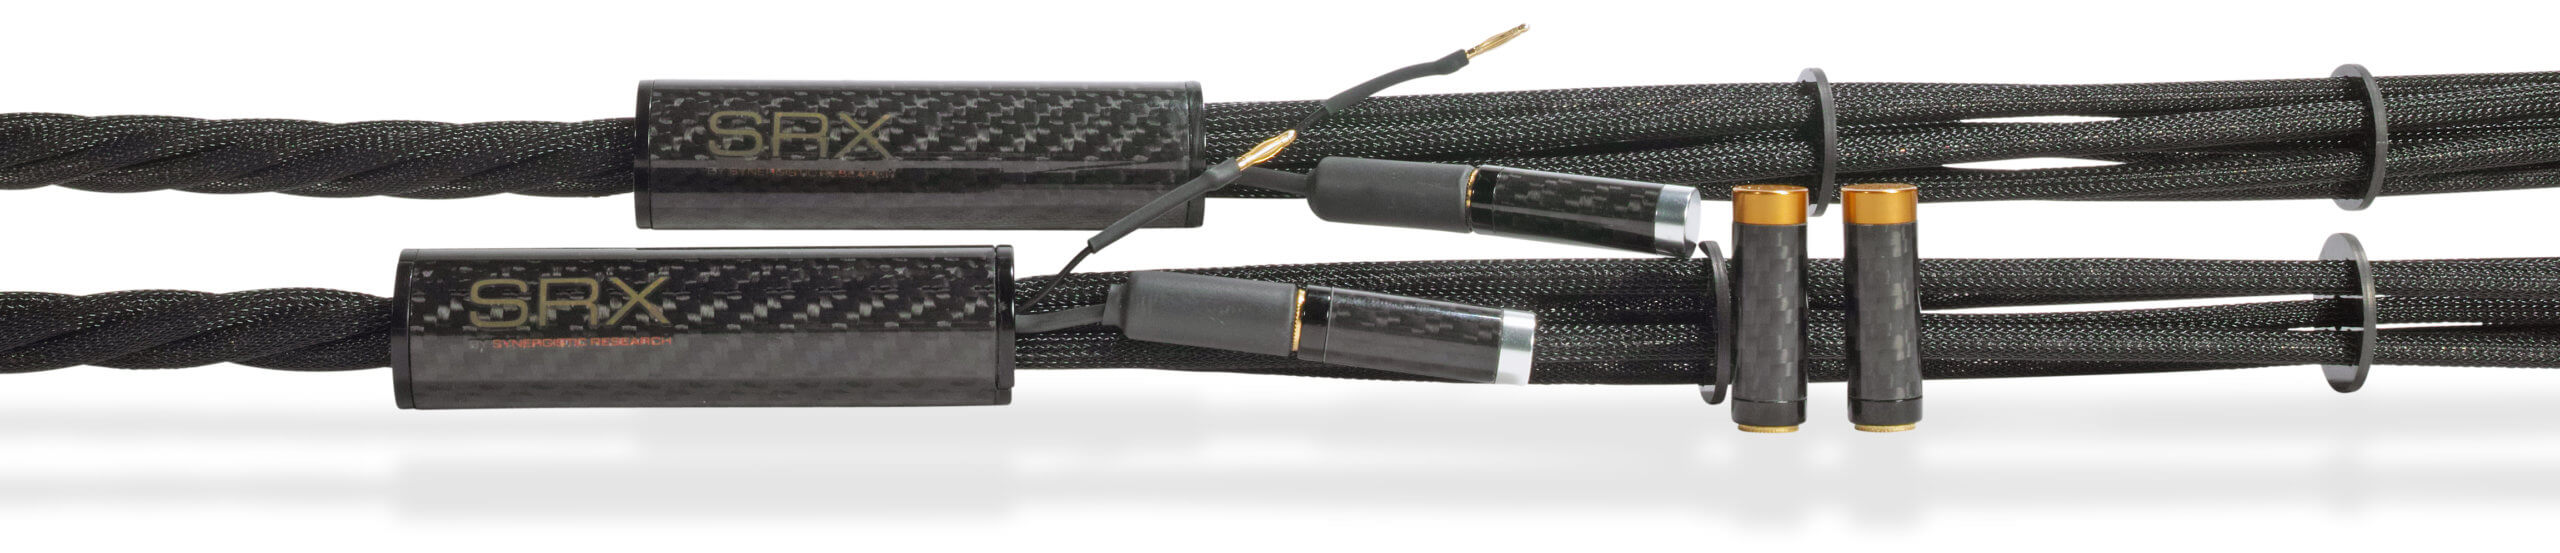 Synergistic Research SRX Interconnect Cable